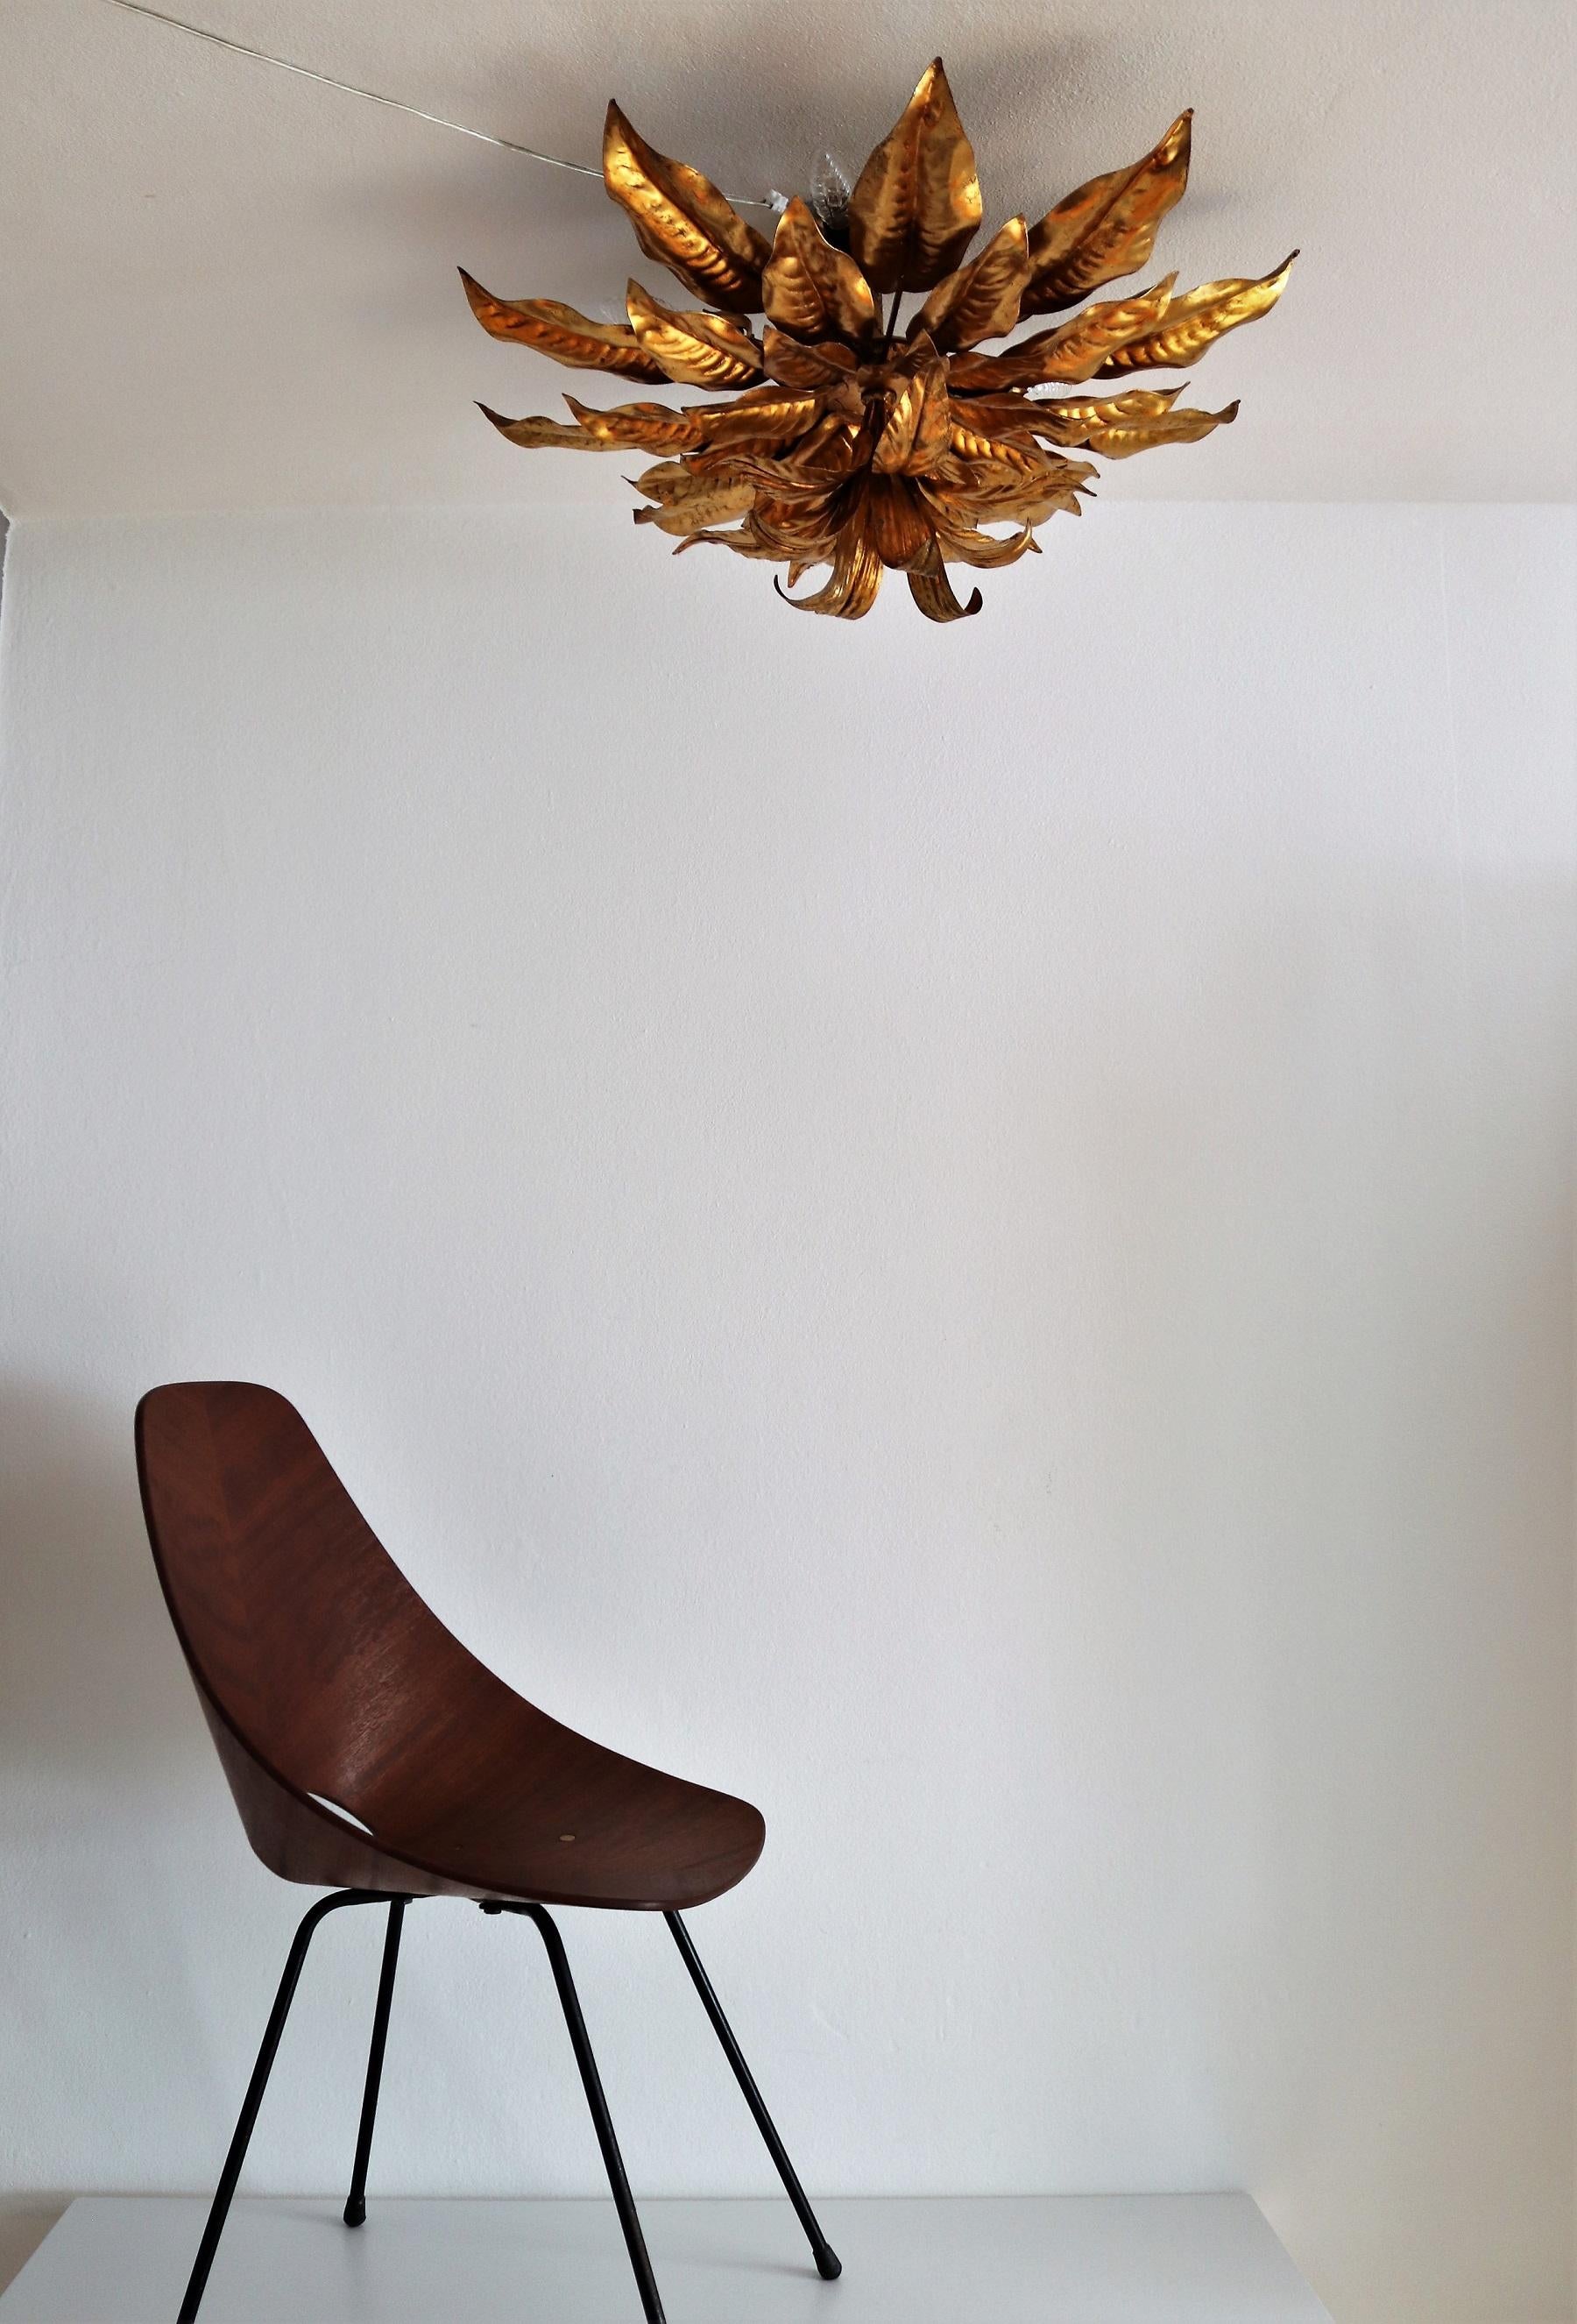 Gorgeous and very big flush mount ceiling light with strong big leaves Made in Italy for Hans Kögl in the 1970s.
The ceiling light is heavy and has a beautiful golden color with little patina.
Under the leaves, close to the ceiling, are hidden five